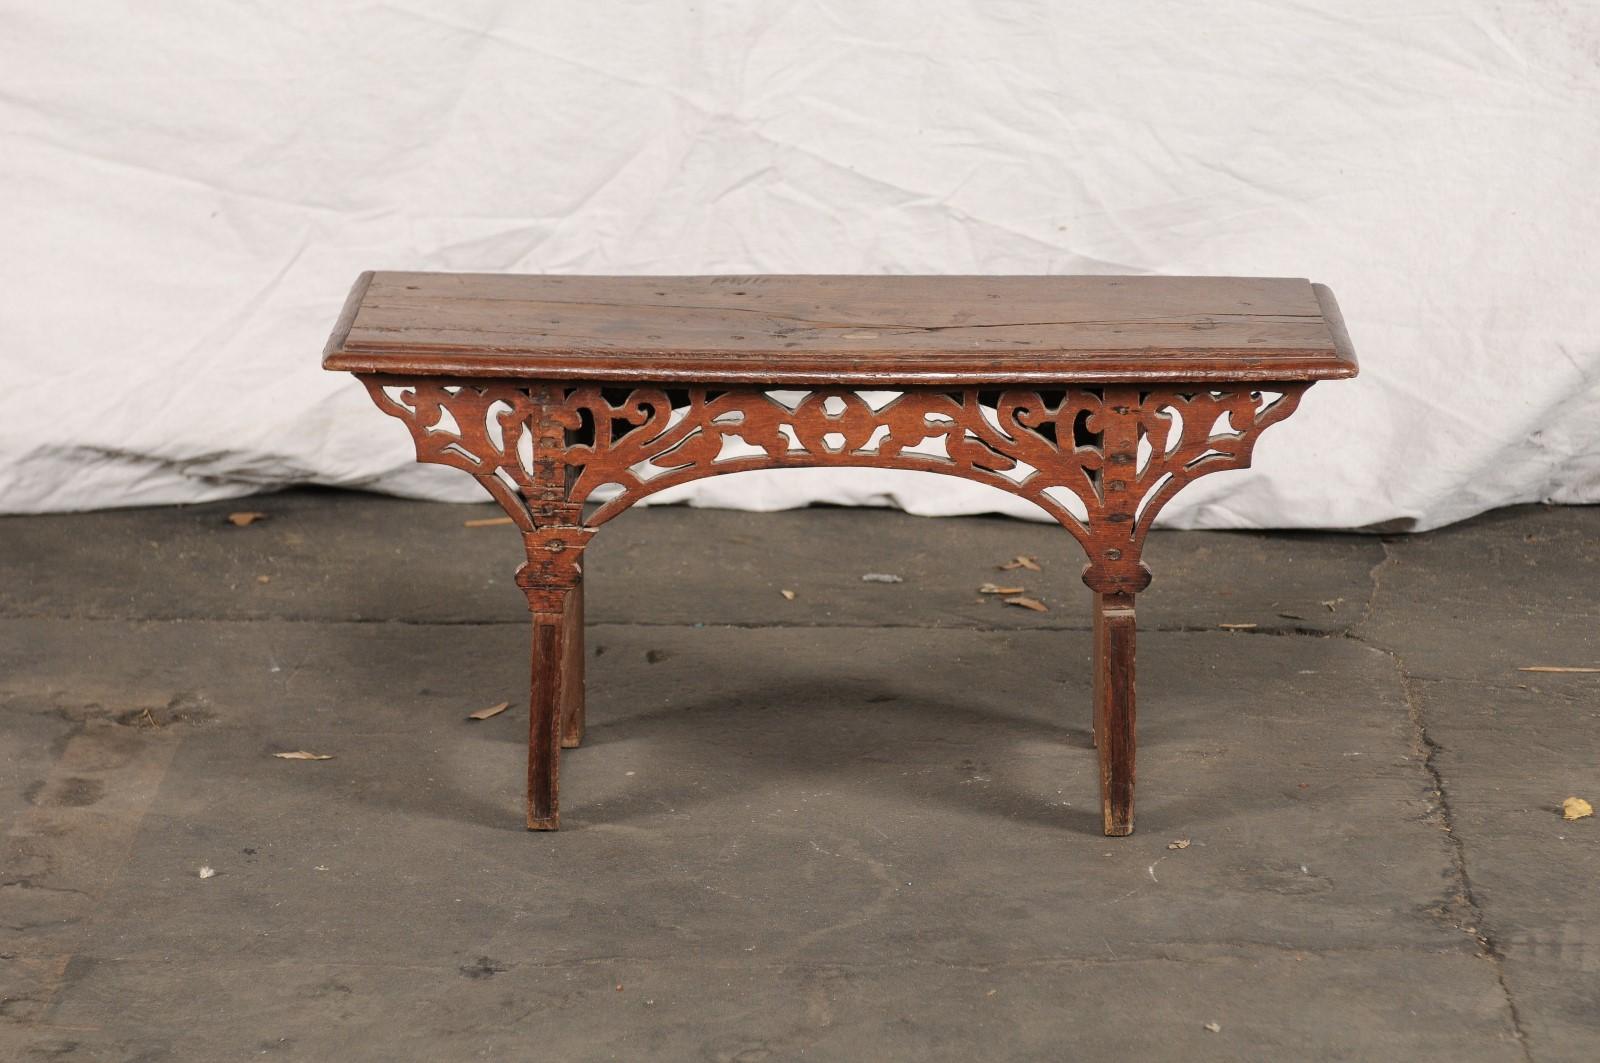 European 20th Century Continental Walnut Bench with Reticulated Carved Front, Labeled